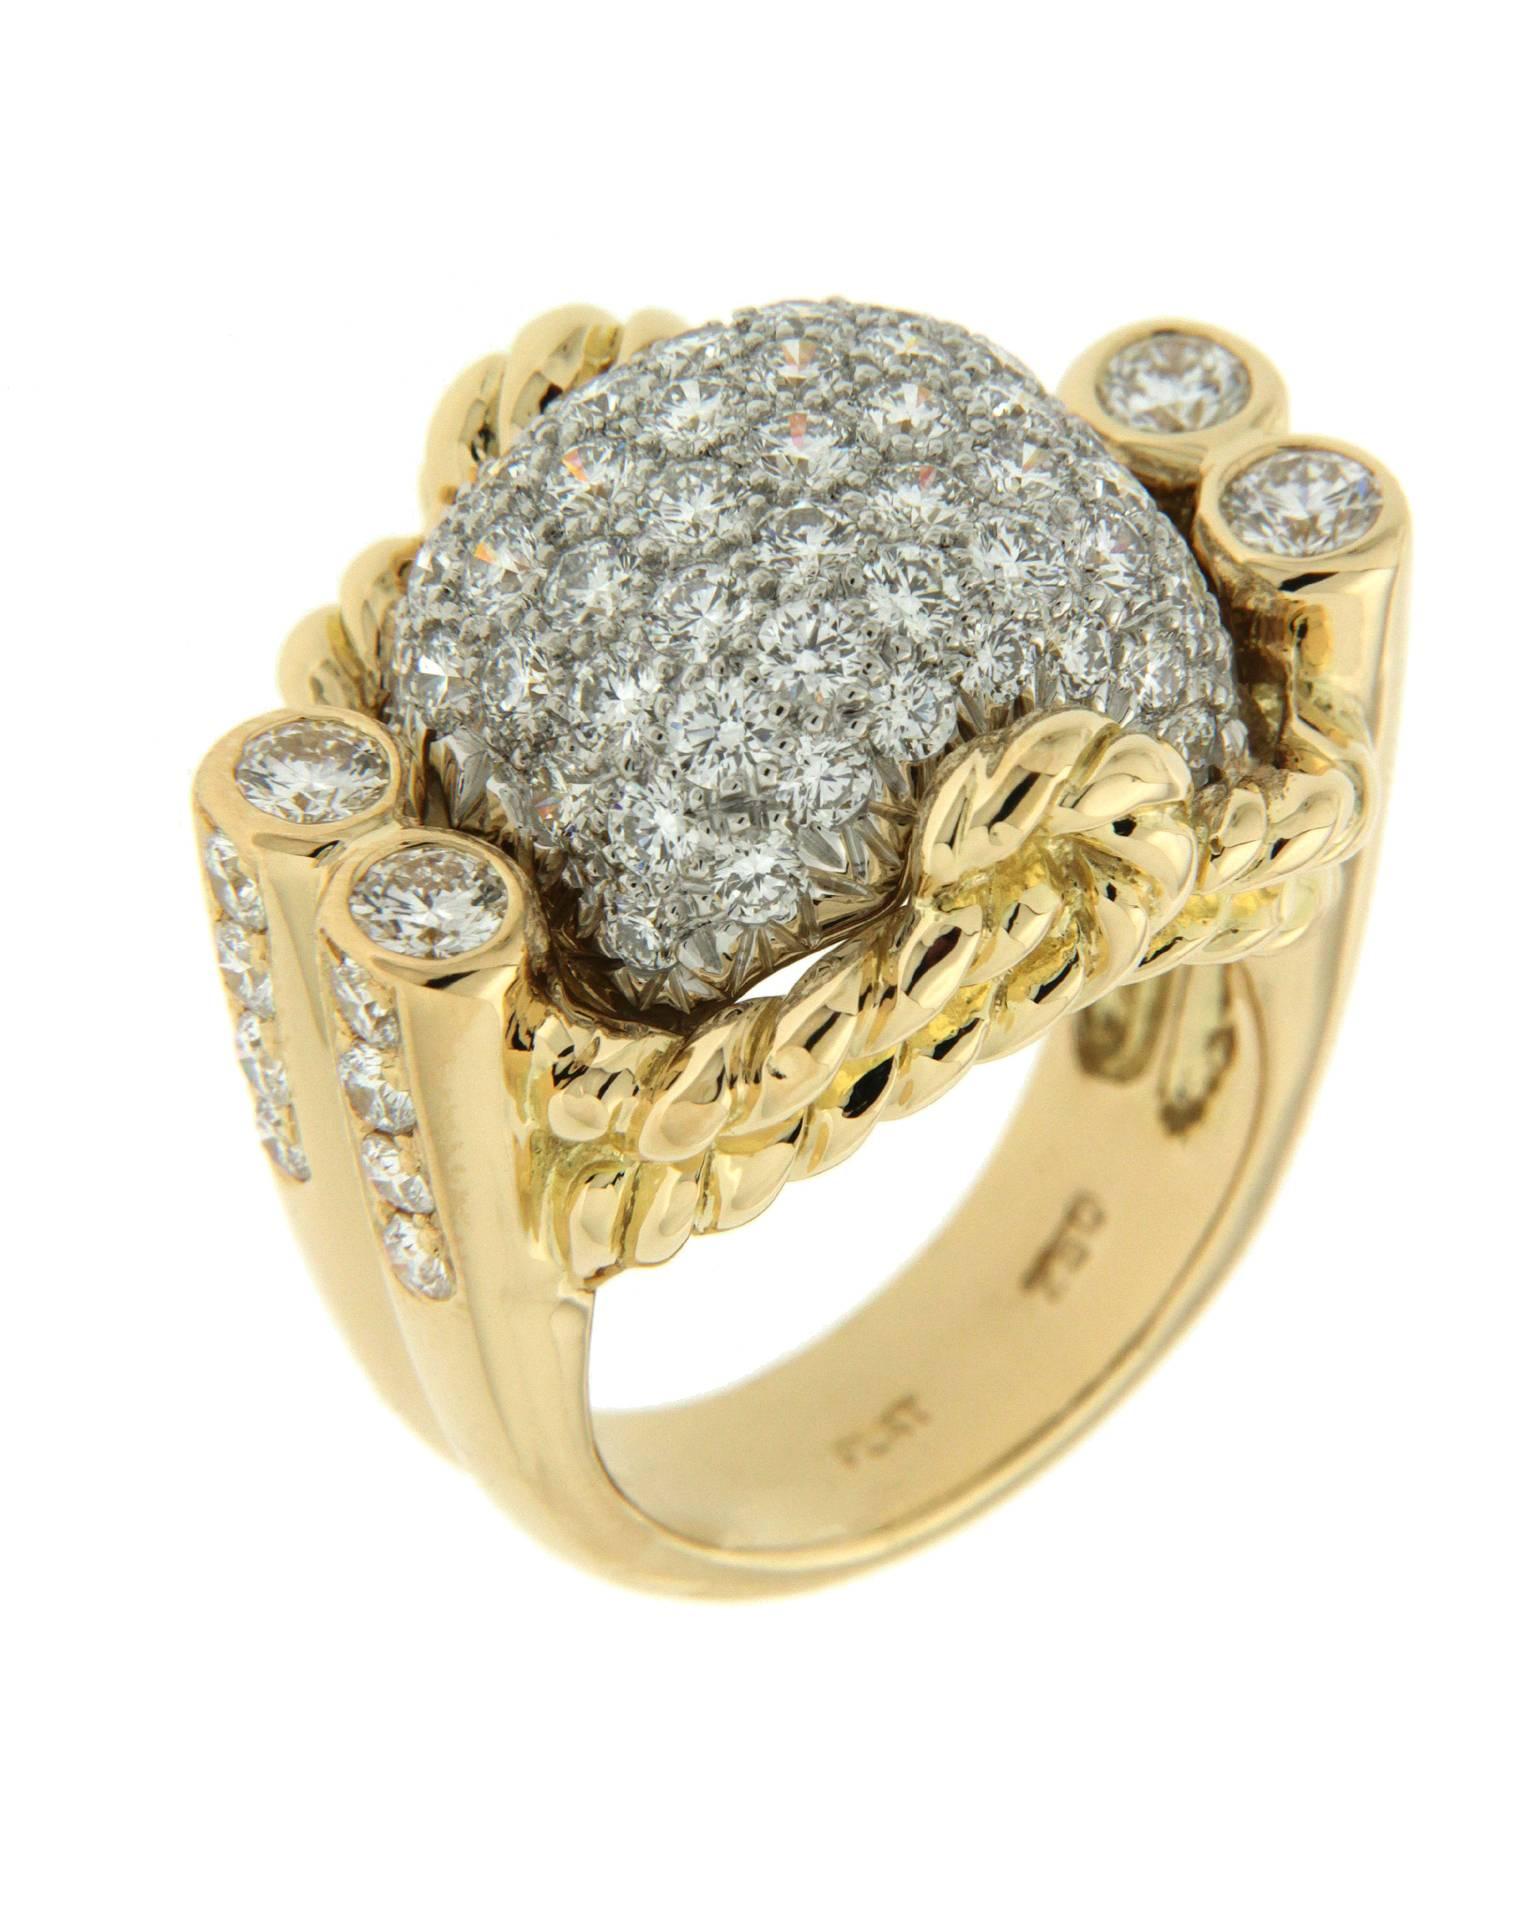 The ring is made in 18kt yellow gold and platinum.  It features round brilliant diamonds with a carat total weight of 3.60.